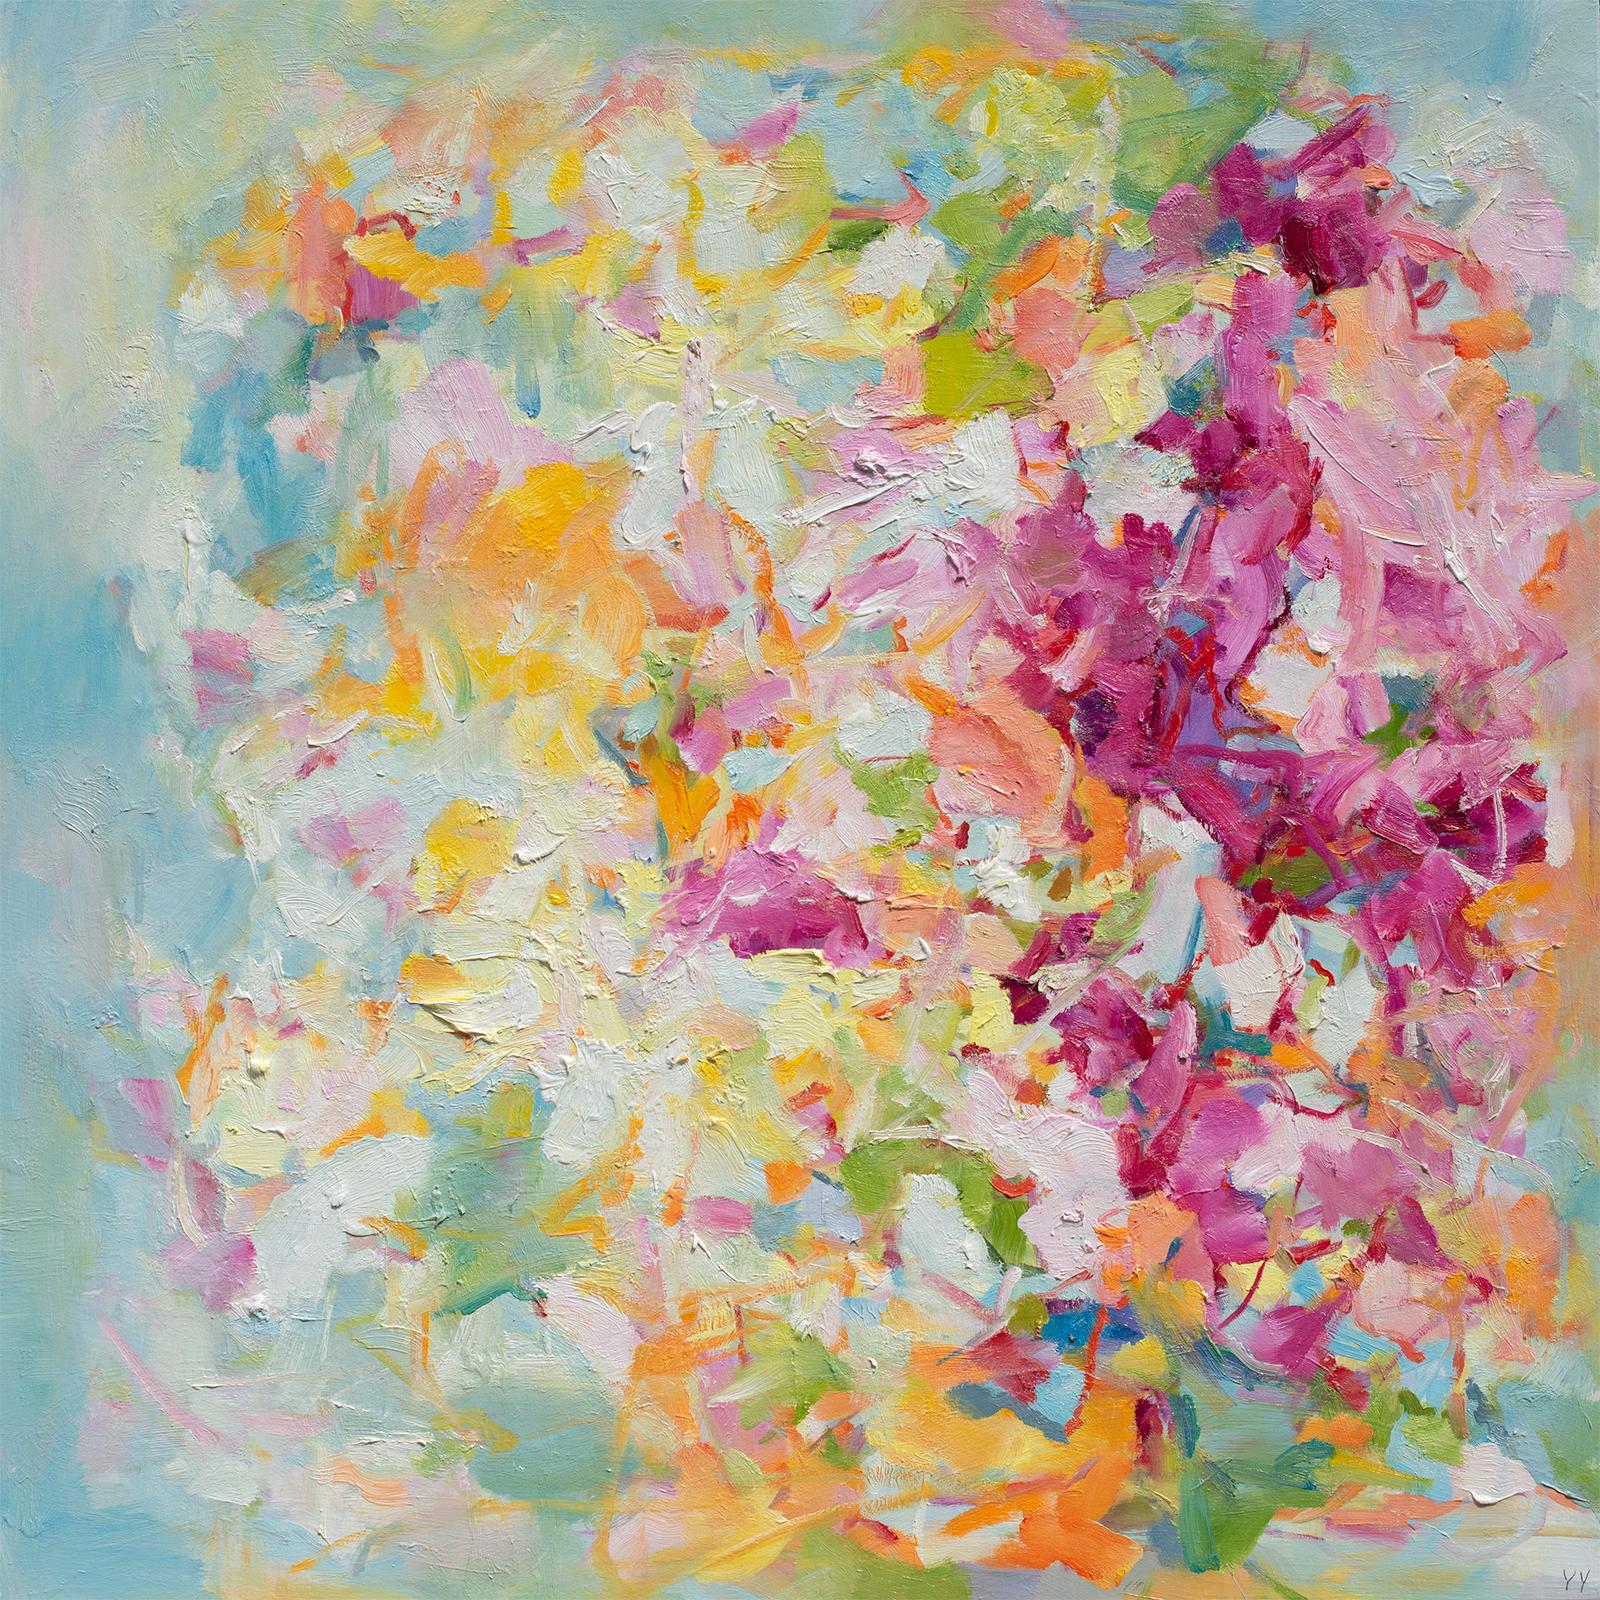 'Flourish' 2023 by Chinese/Canadian artist Yangyang Pan. Oil on canvas, 36 x 36 in. / Frame: 37 x 37 in. This beautiful abstract-expressionistic, landscape painting incorporates gestural brushstrokes resembling a floral garden in pastel colors of